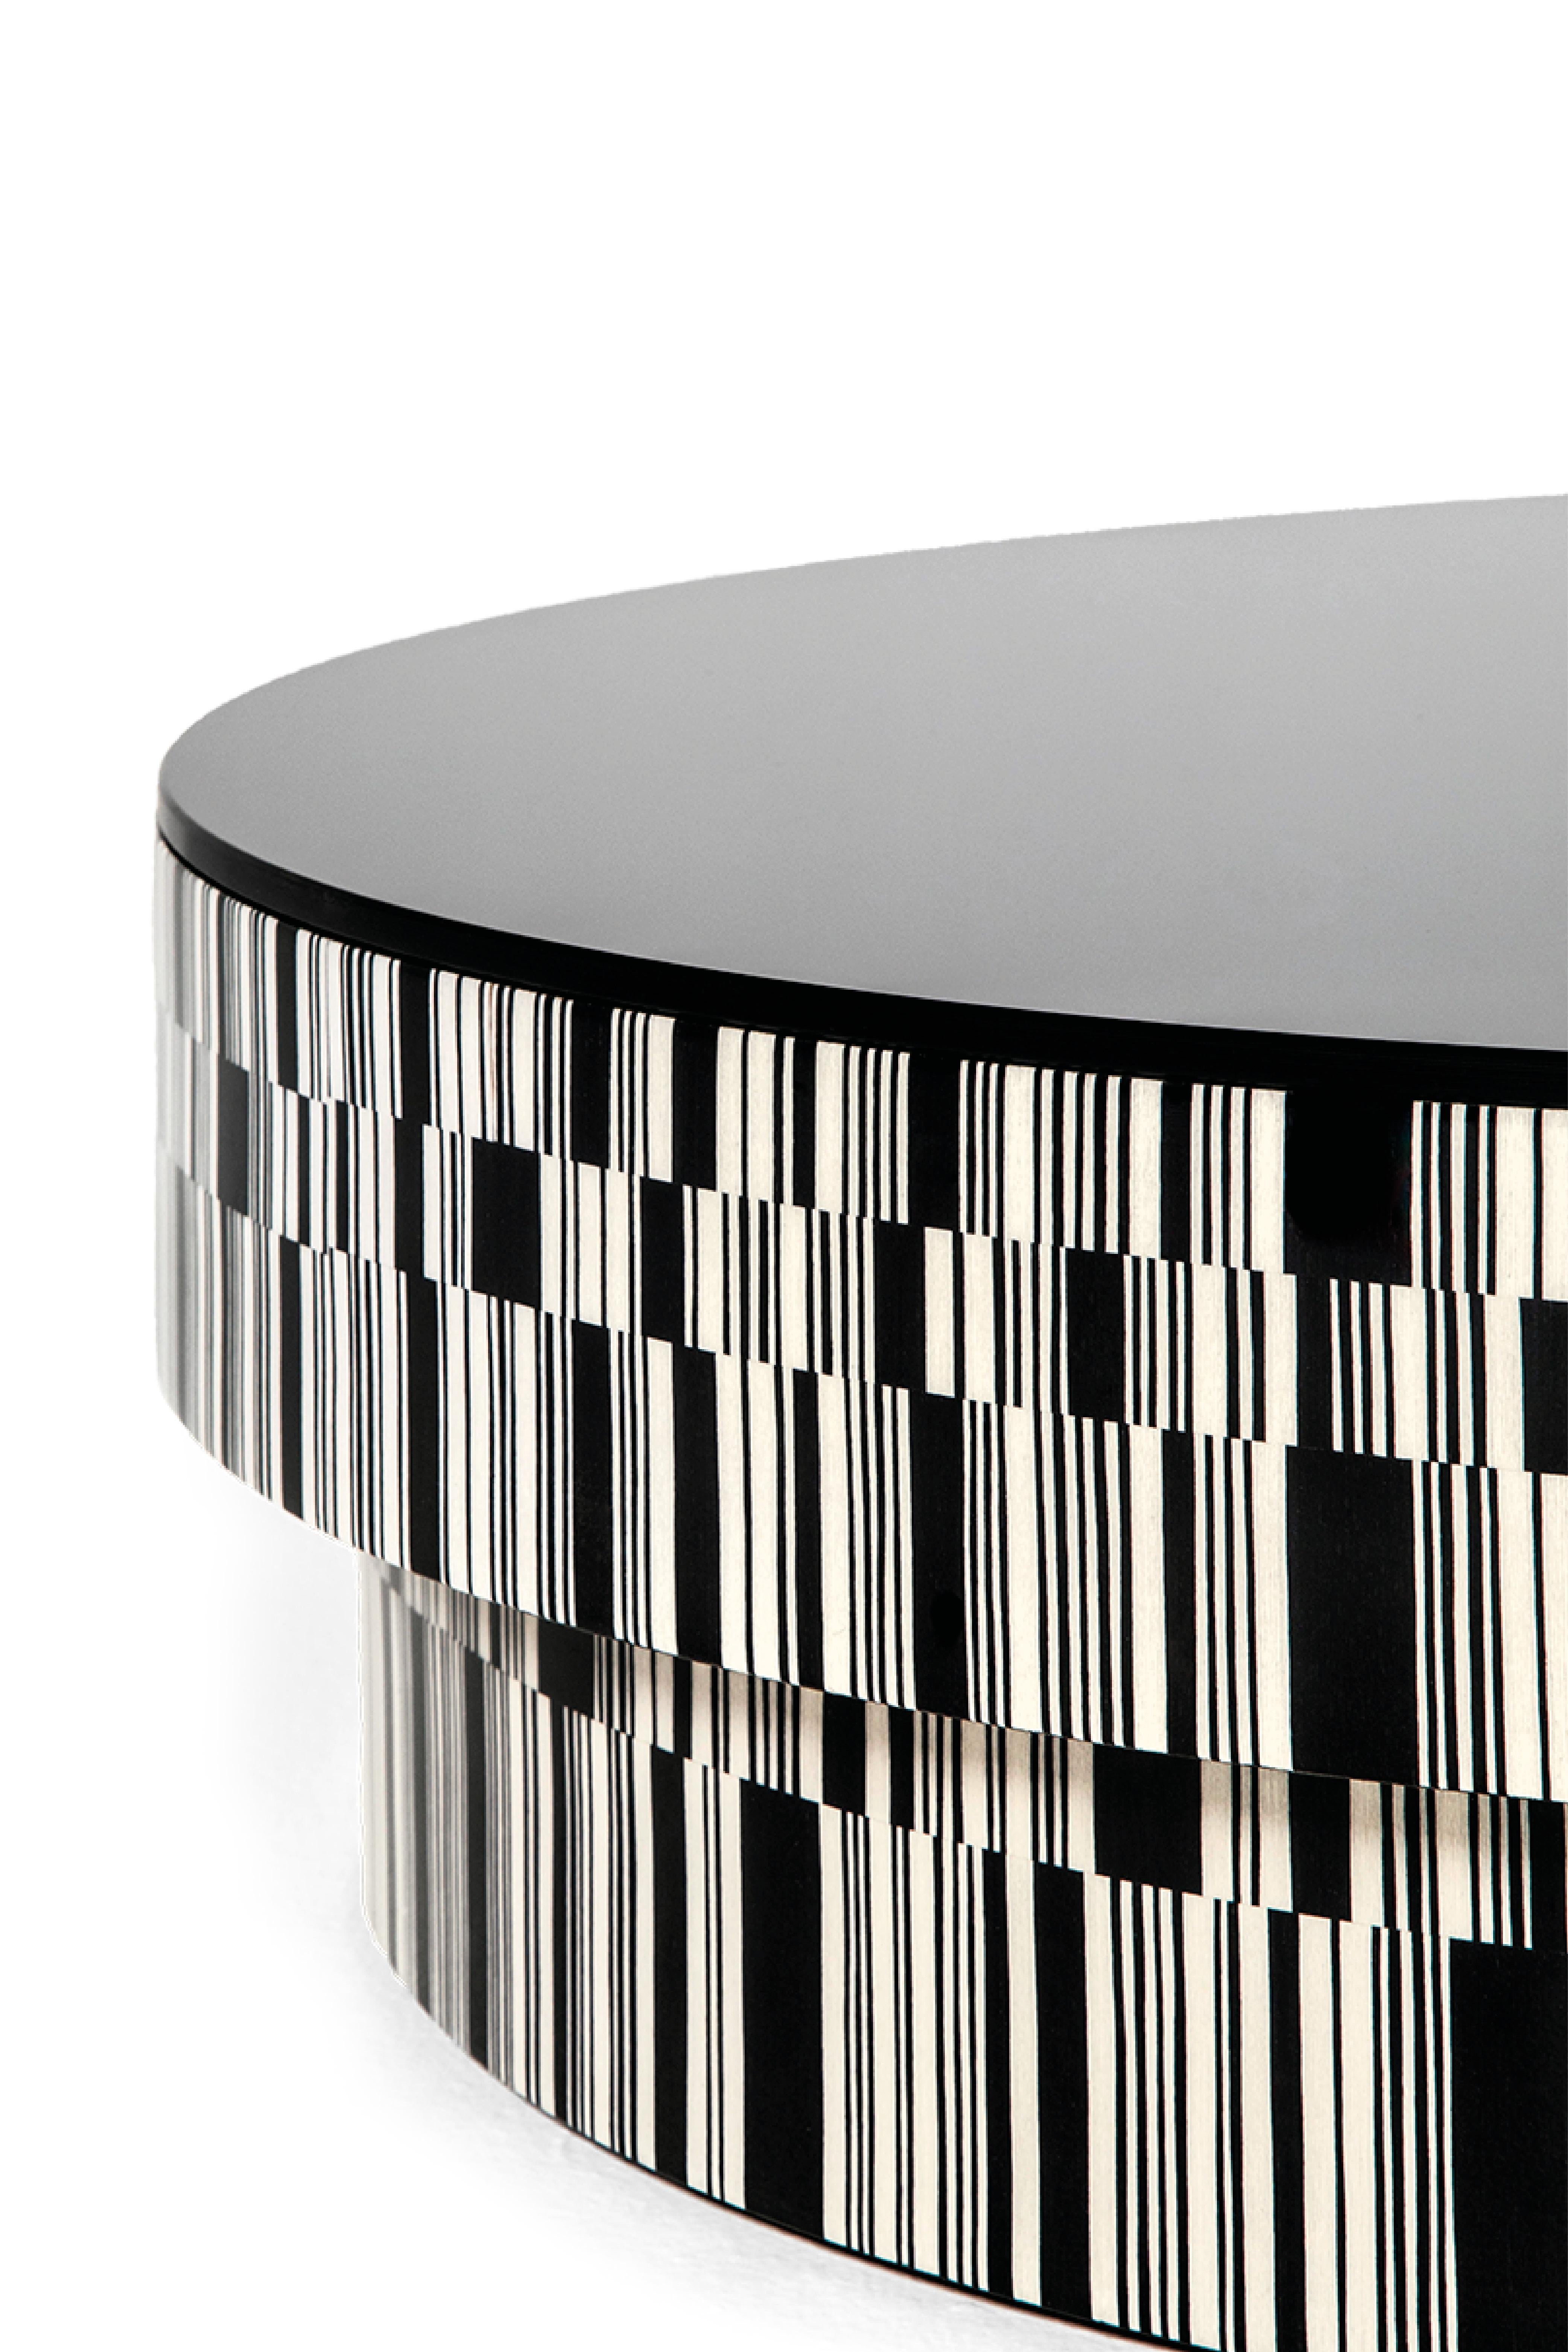 The structure of Enigma side table is upholstered with wood, processed with cross-grain inlay with white and black shades that alternate in an irregular way. It presents matt Matrix finish and the black glass top.